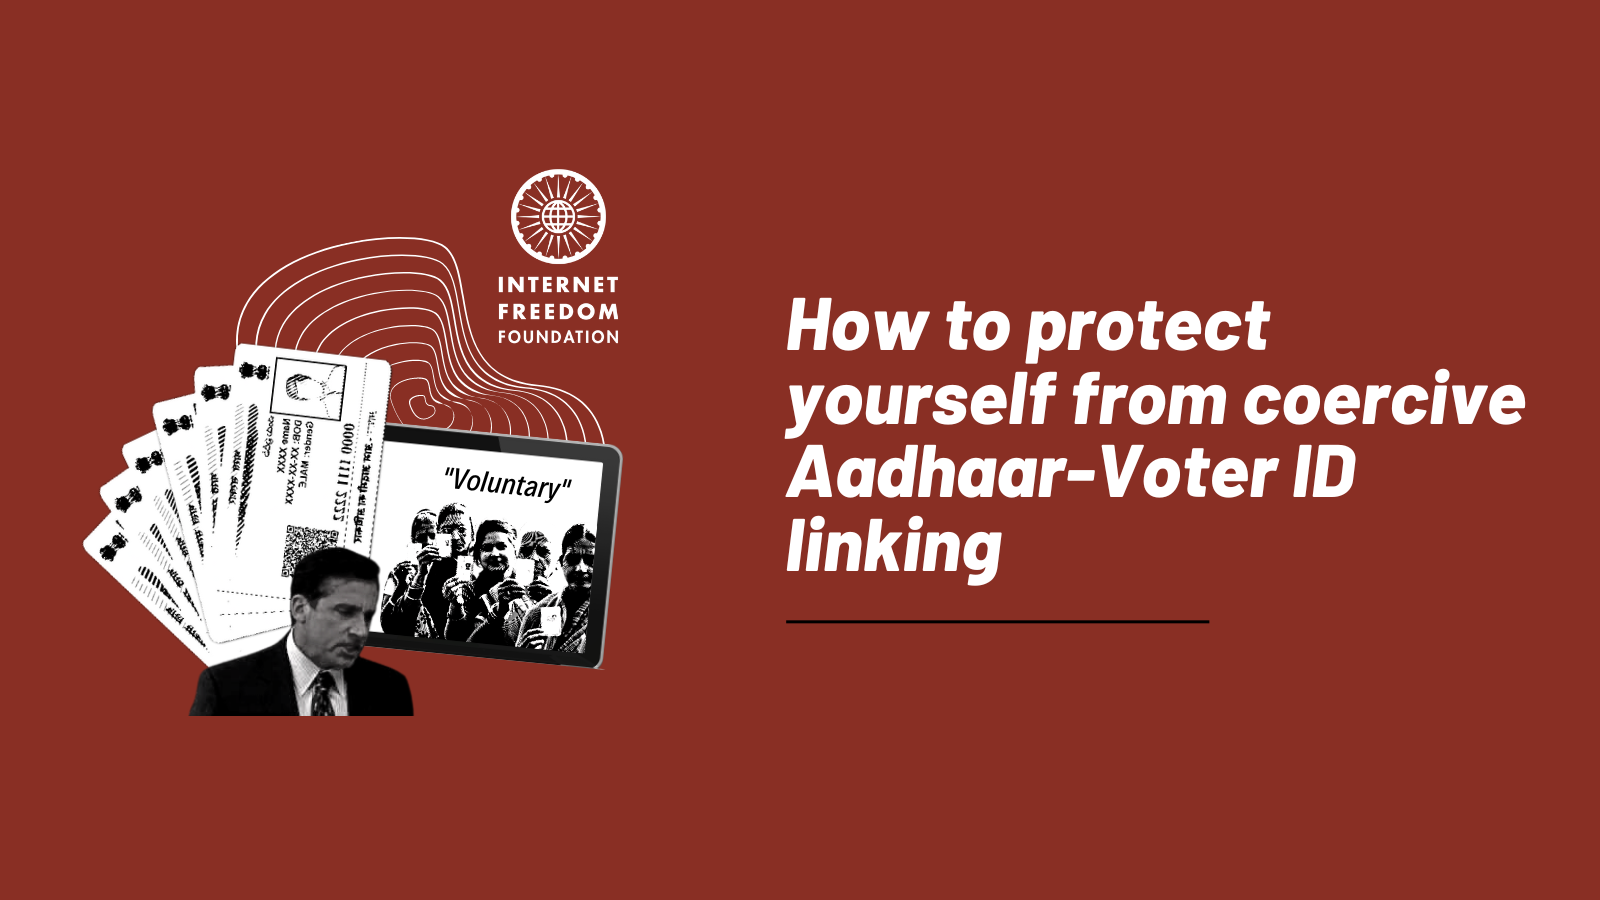 How-to-protect-yourself-from-coercive-Aadhaar-Voter-ID-linking.png#asset:13705